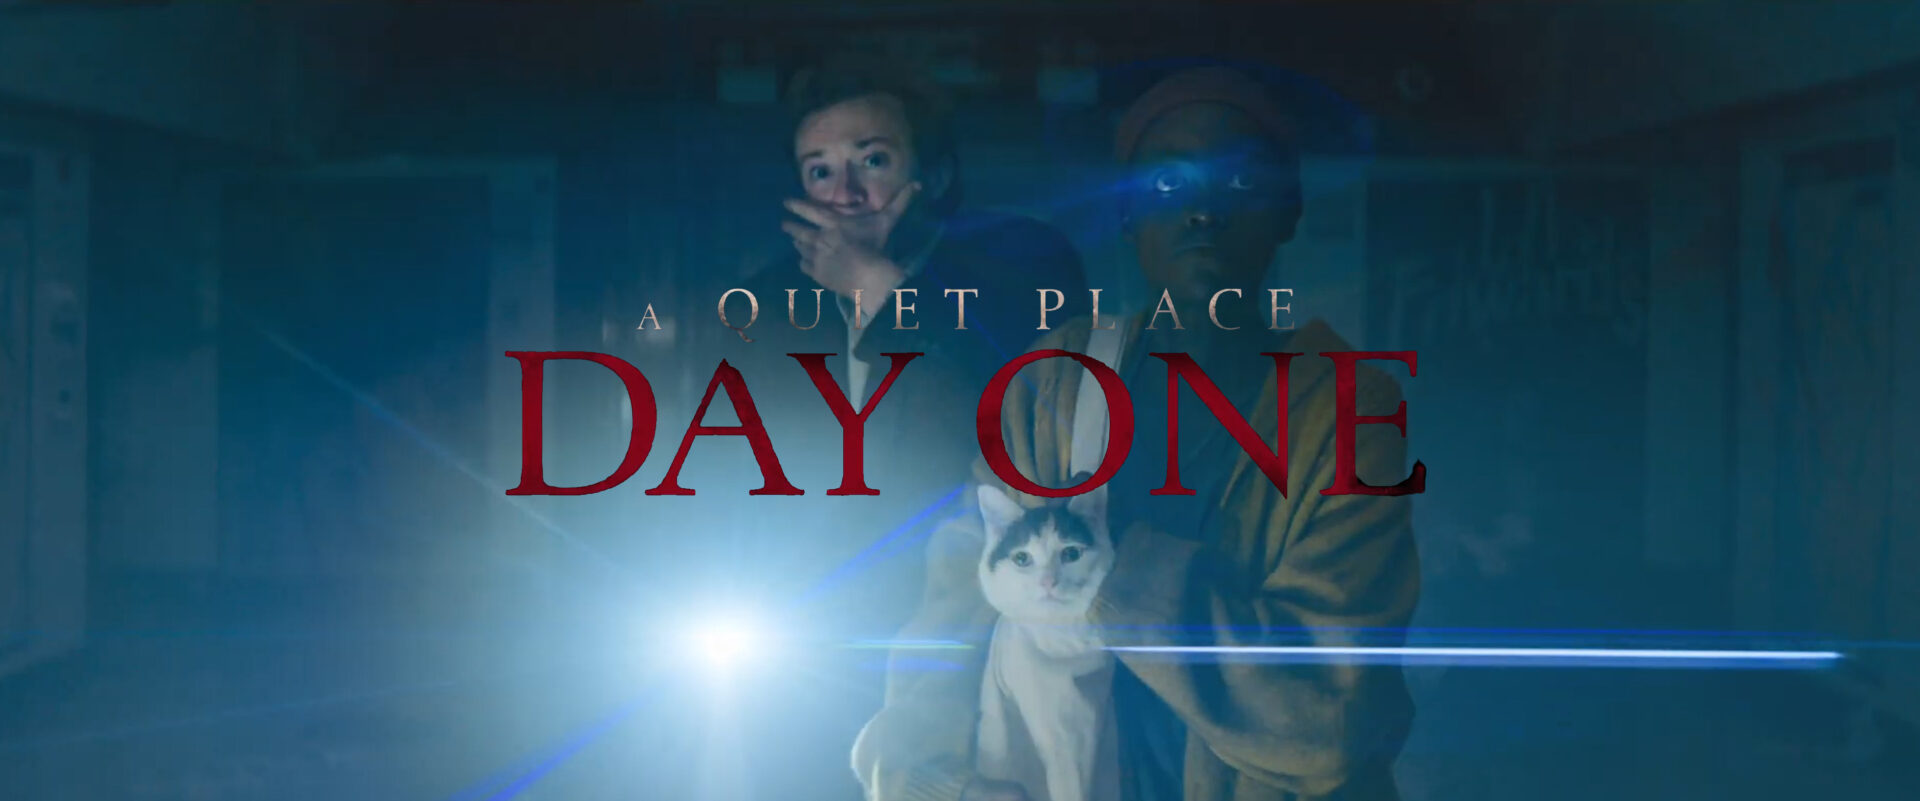 a-quiet-place-day-one-trailer-banner